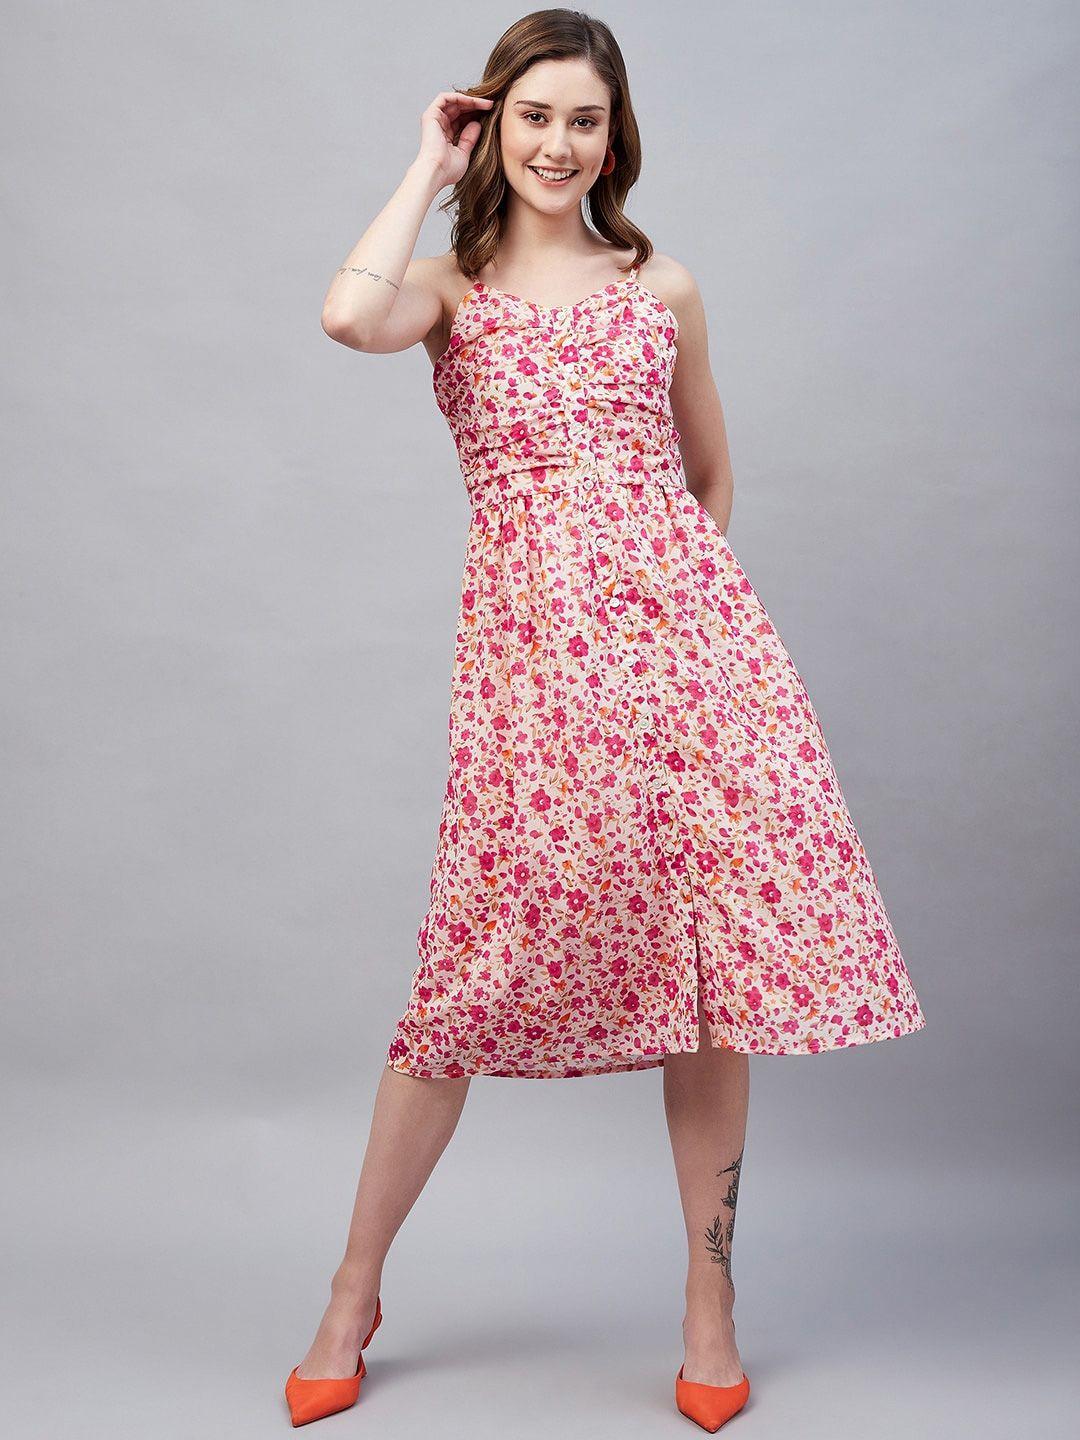 marie claire floral printed shoulder strap smocked midi dress